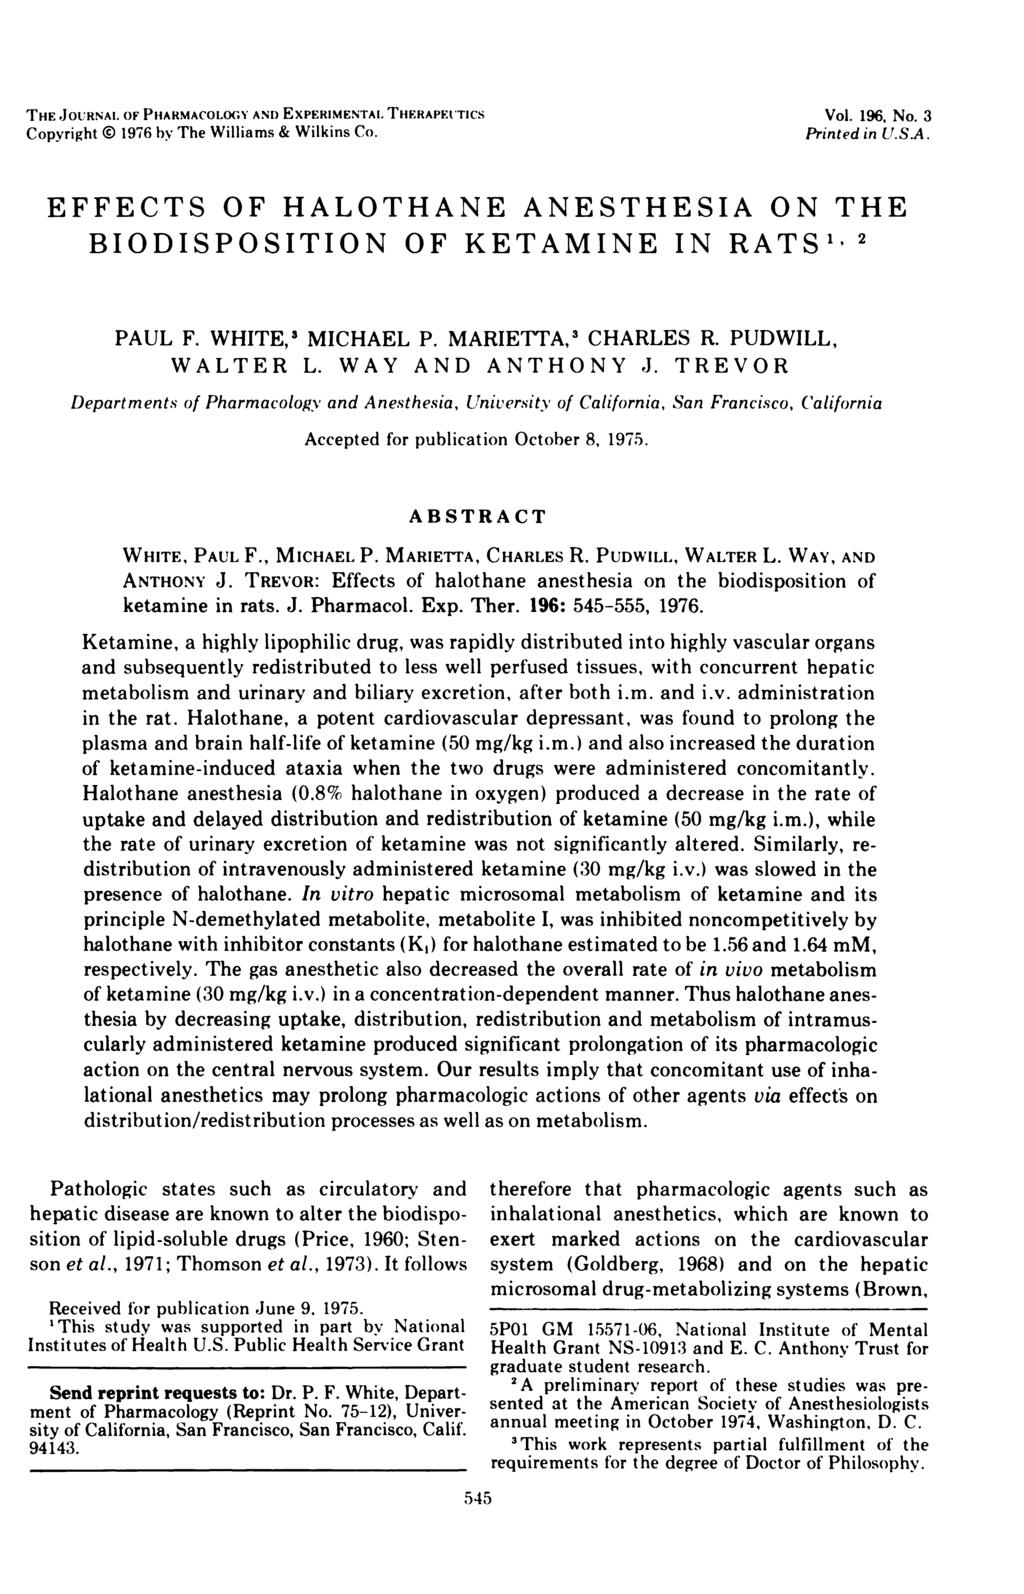 THE JOURNAL. OF PHARMACOLOGY AM) EXPERIMENTAl. THERAPEUTICS Copyright 1976 by The Williams & Wilkins Co. Vol. 196, No. 3 Printed in U.S.A. EFFECTS OF HALOTHANE ANESTHESIA ON THE BIODISPOSITION OF KETAMINE IN RATS 2 PAUL F.